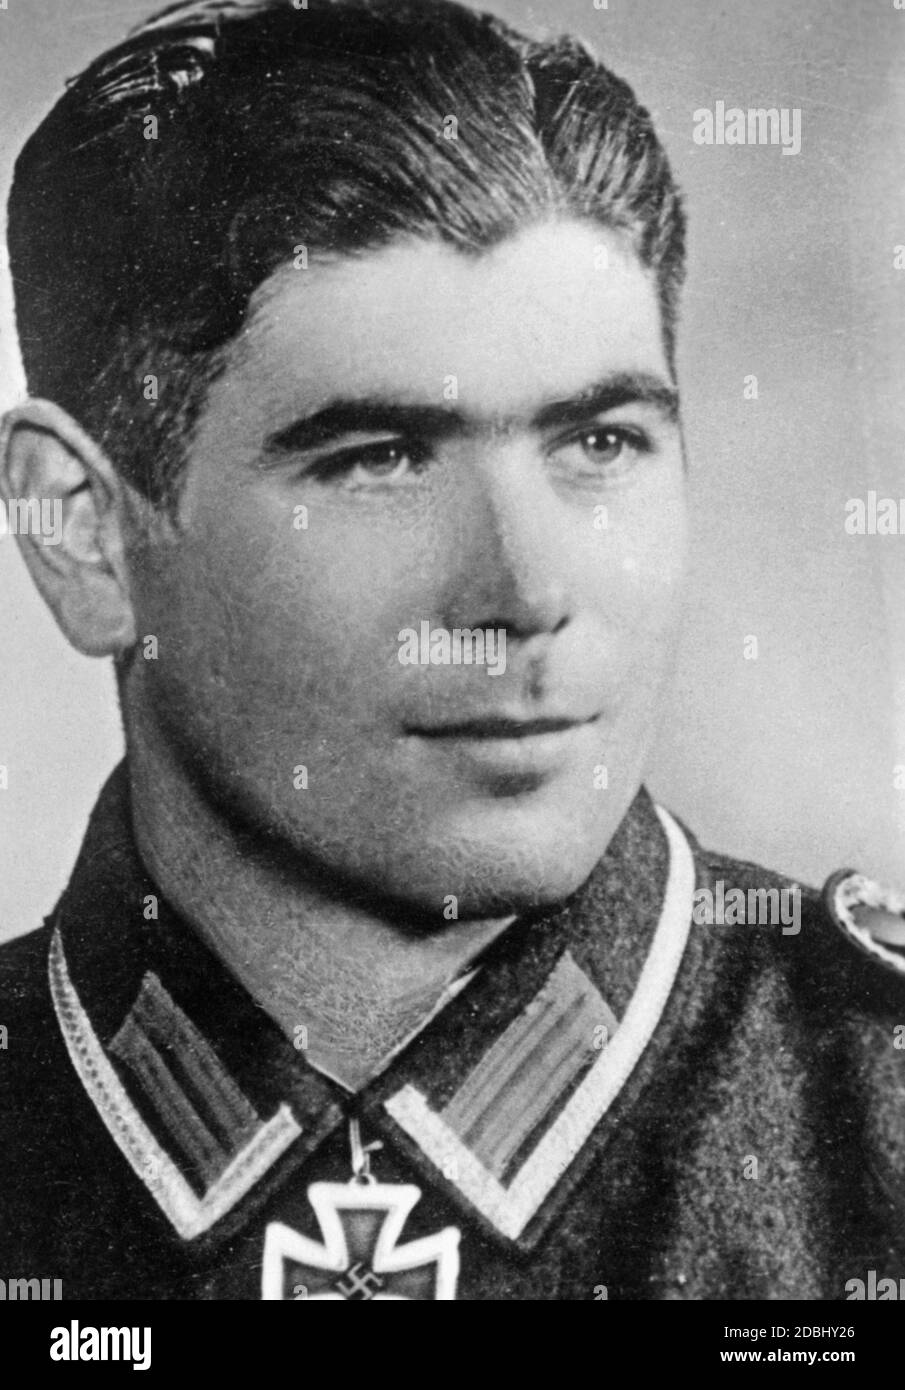 Gefreiter Sebastian Reiser, 1./Artillerieregiment 297, with the Knight's Cross in 1941. The date indicates the date of bestowal. Stock Photo